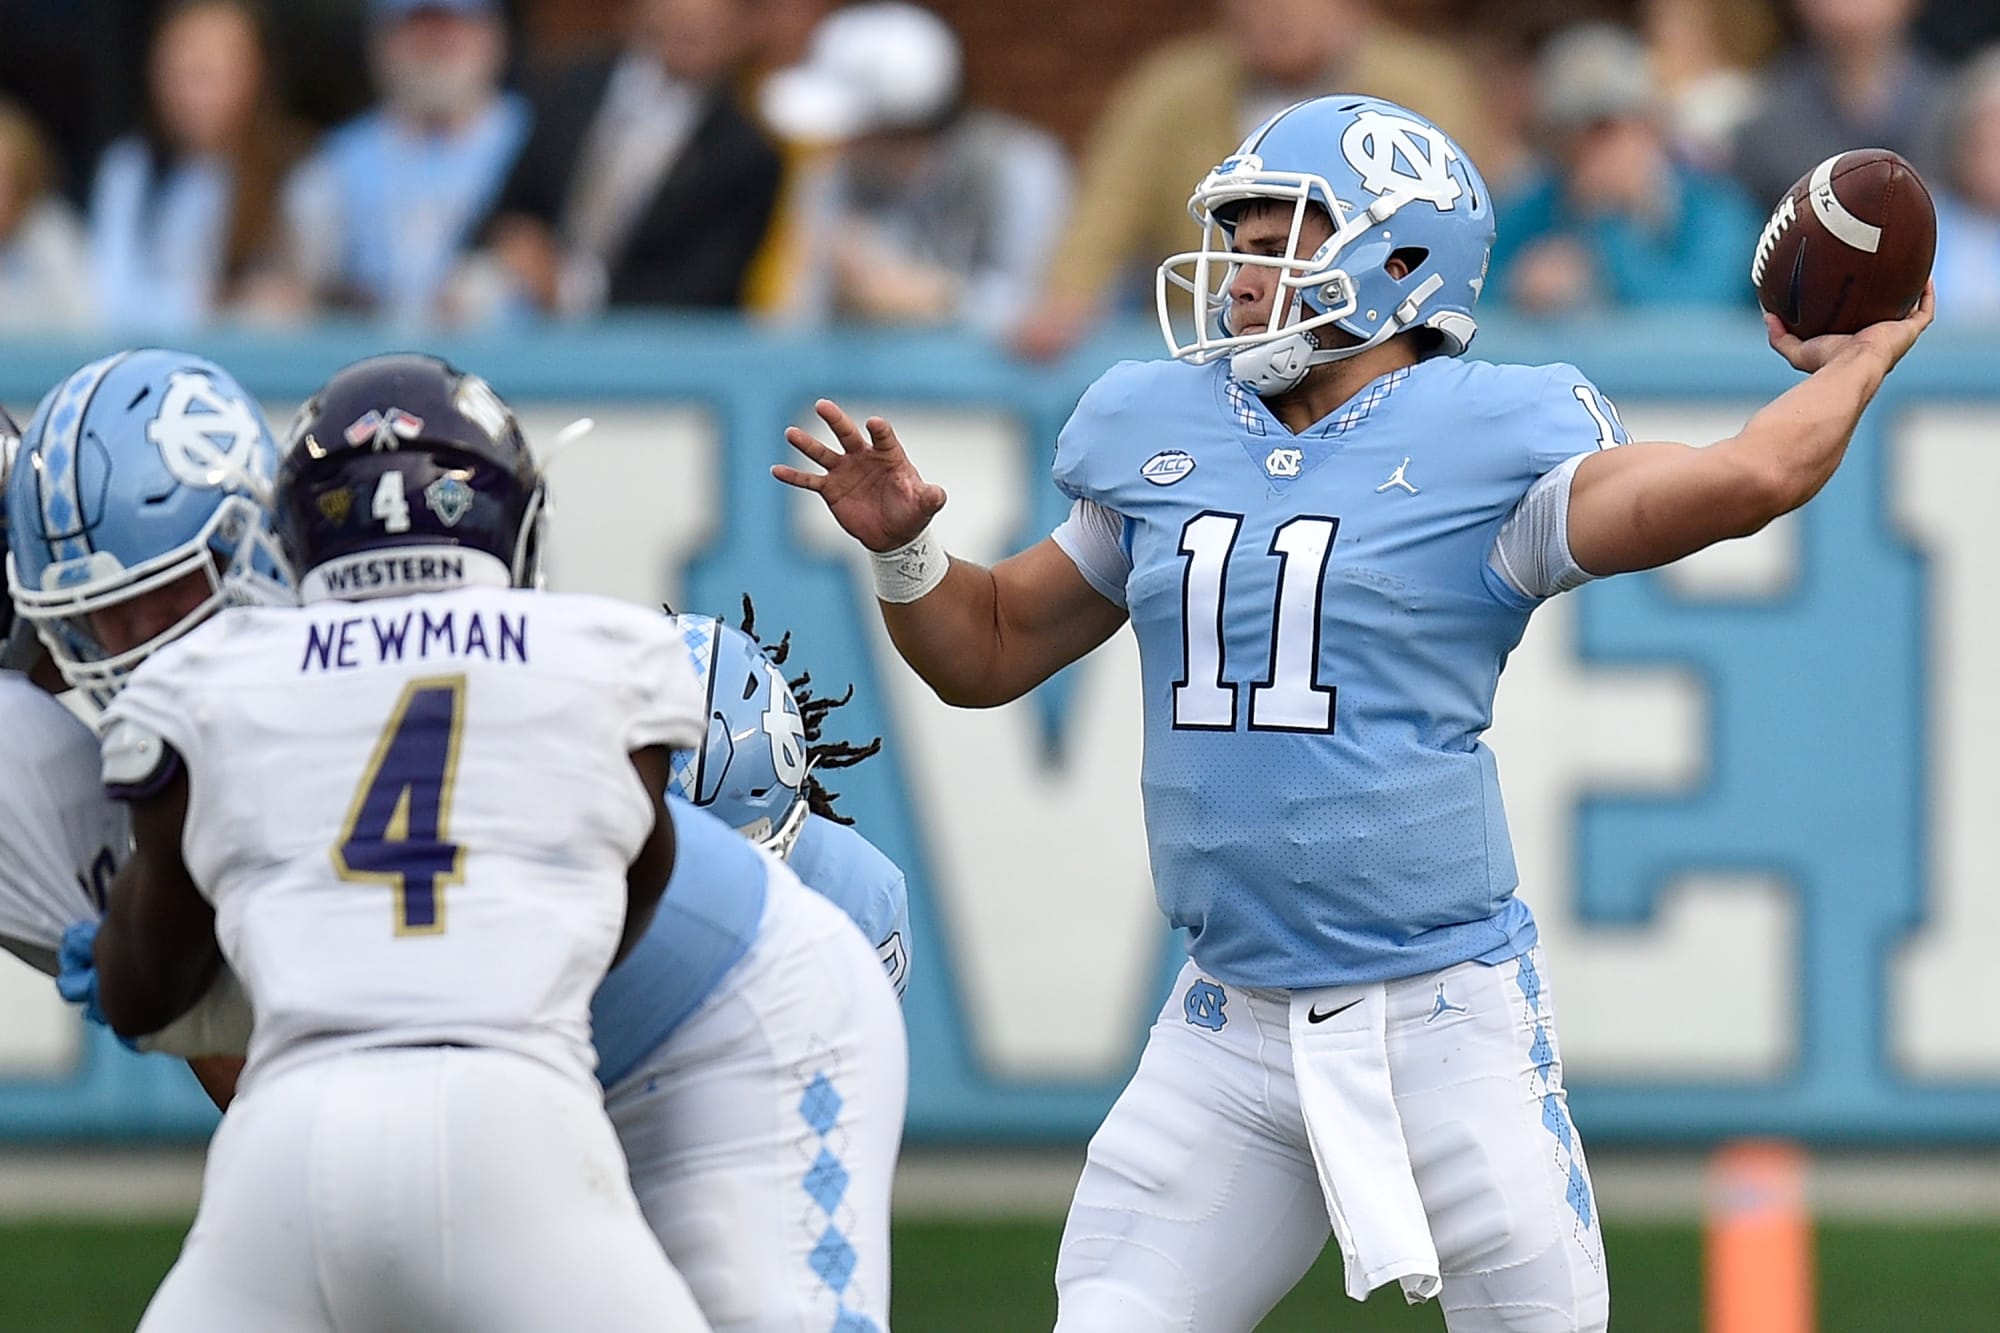 UNC vs. NC State Game info, preview, prediction and more